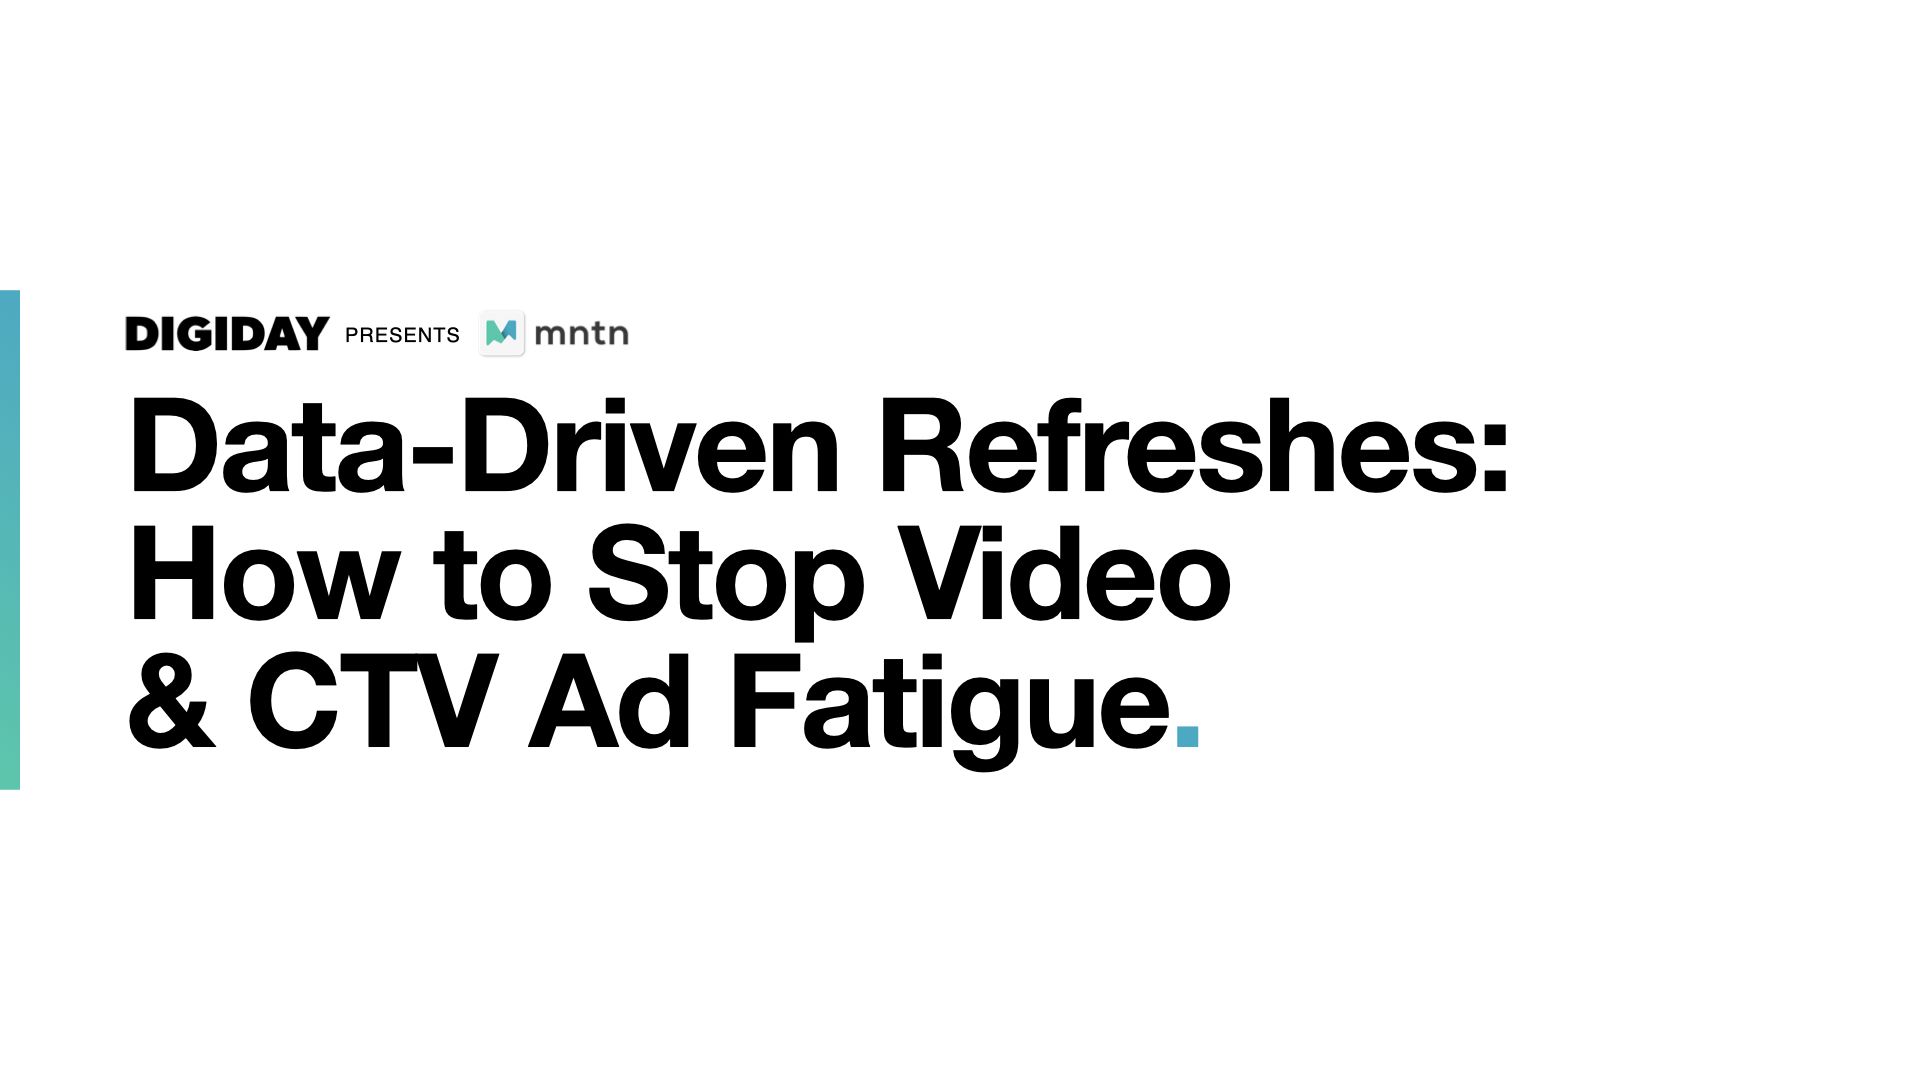 Data-Driven Refreshes: How to Stop Video and CTV Ad Fatigue